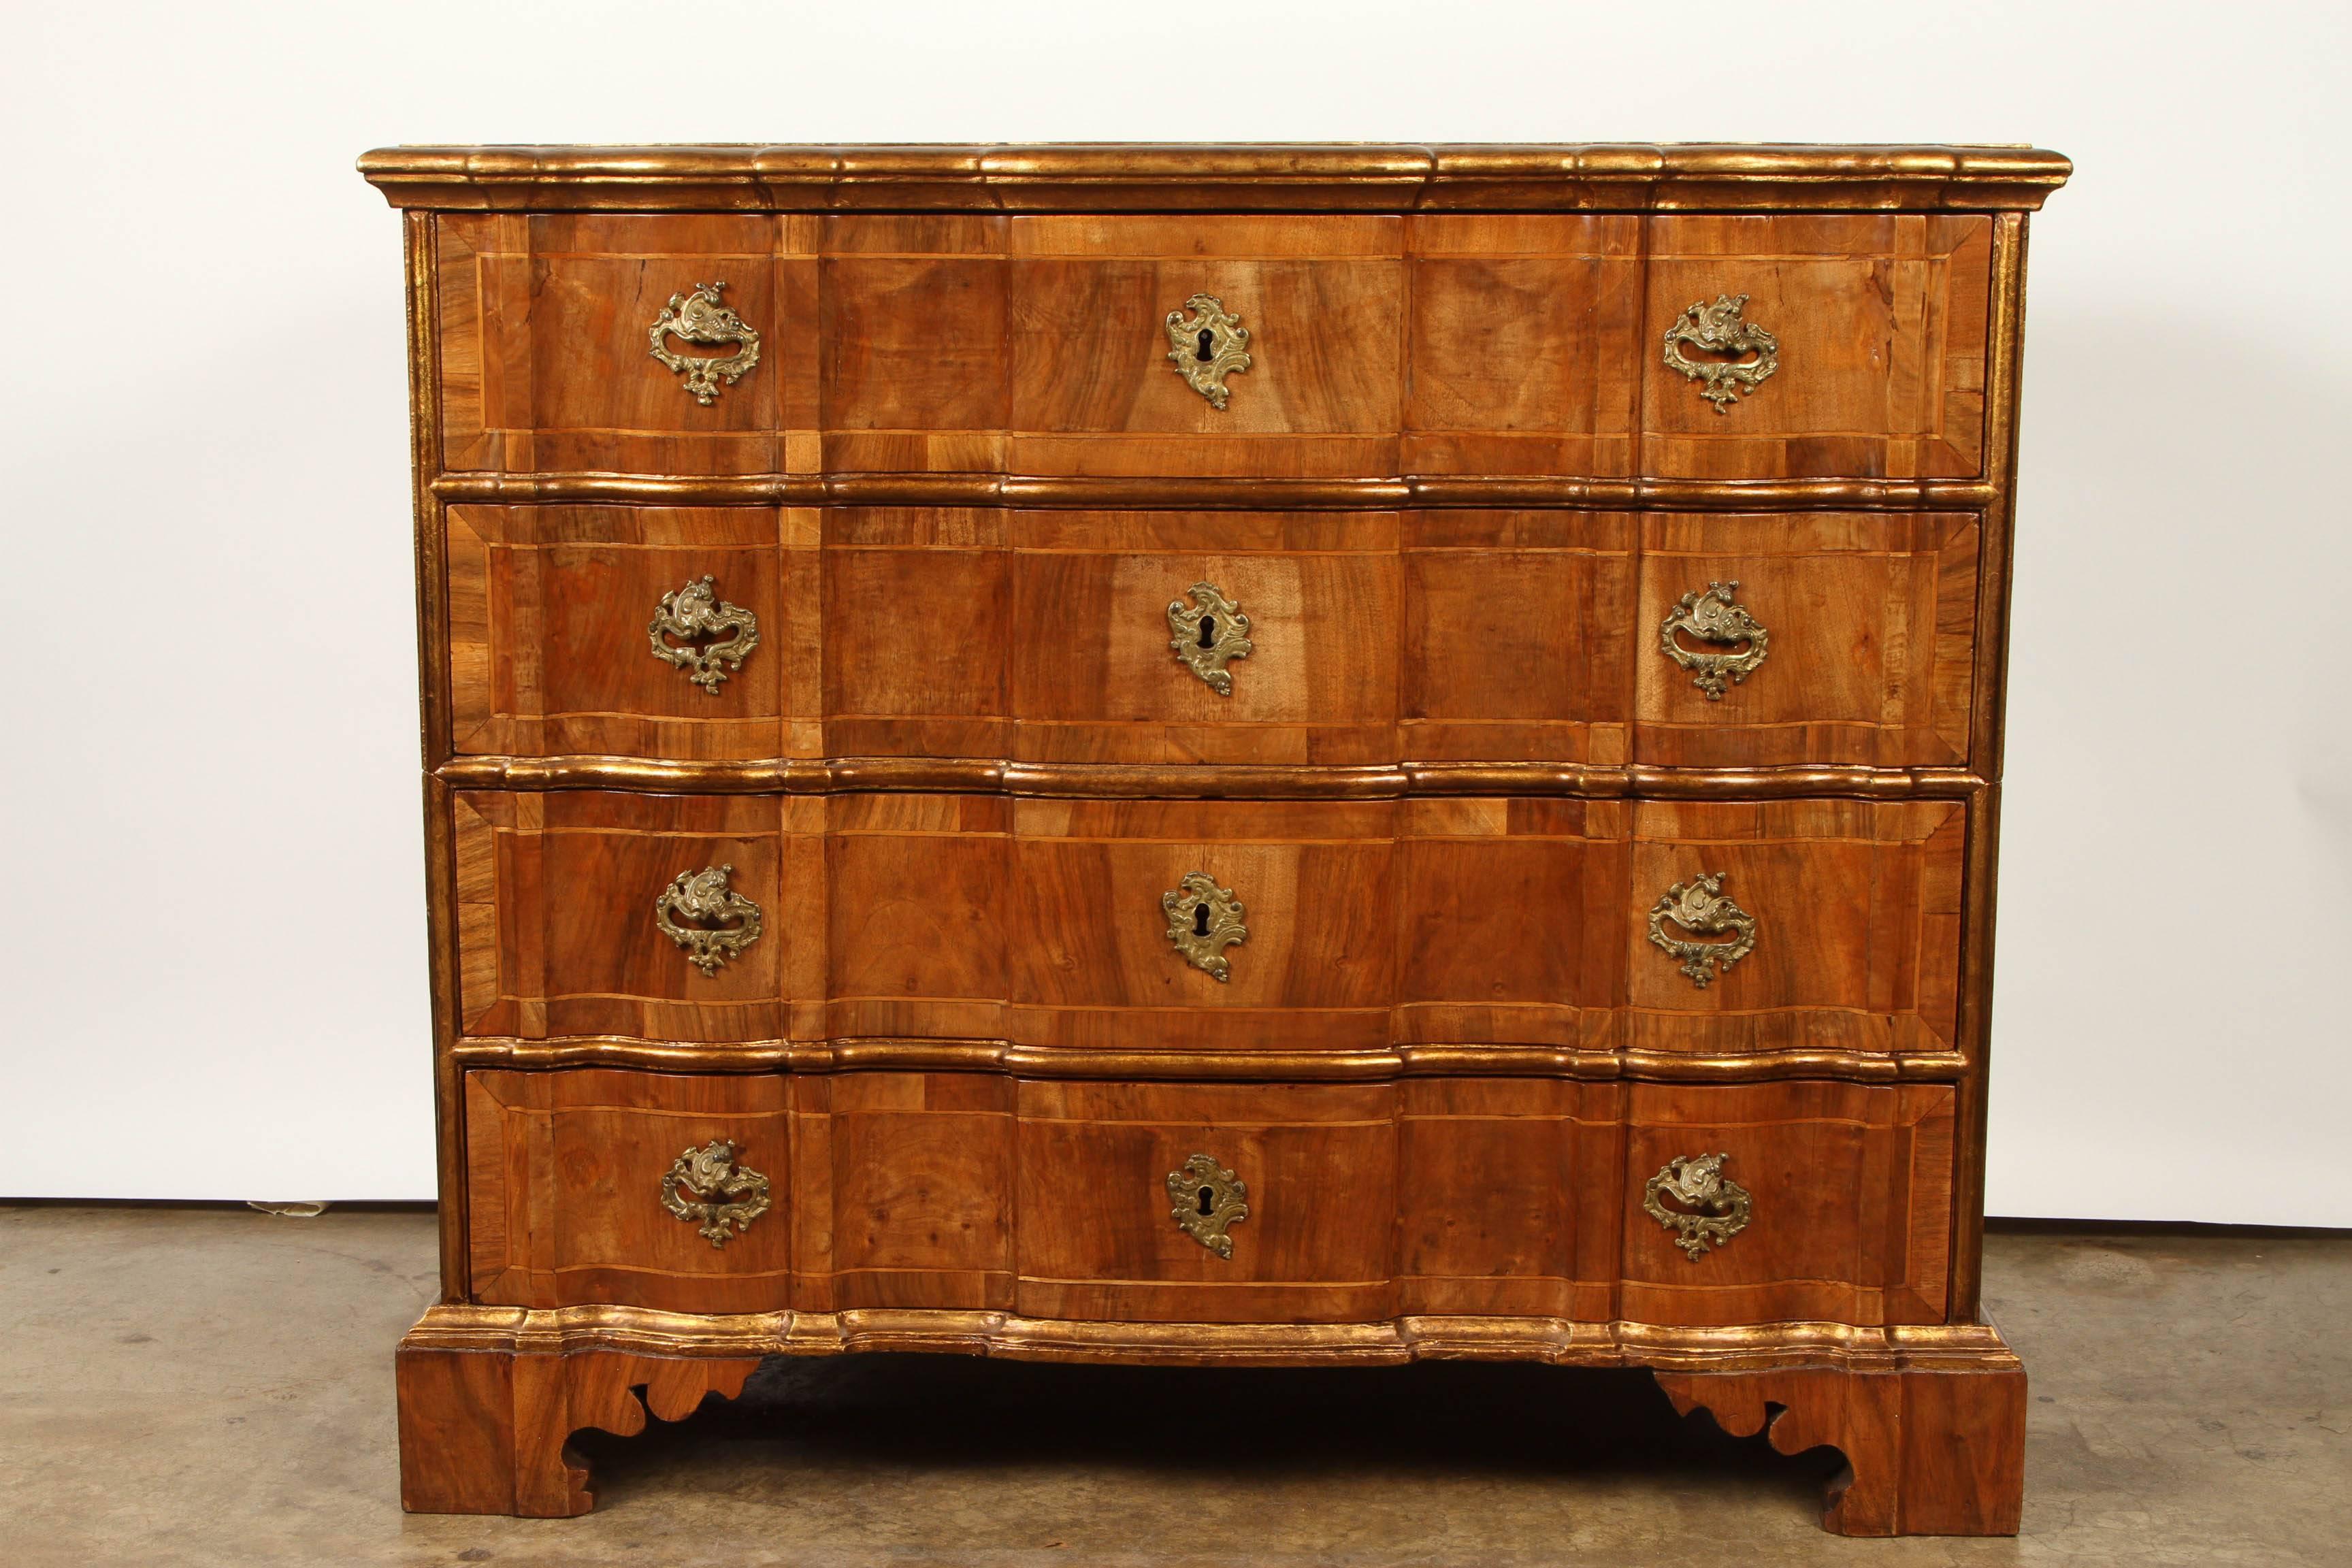 A Danish Rococo chest of drawers, consisting of four drawers, with gilt bronze hardware and gilt borders. This Danish chest is veneered in walnut and has banding on each drawer.